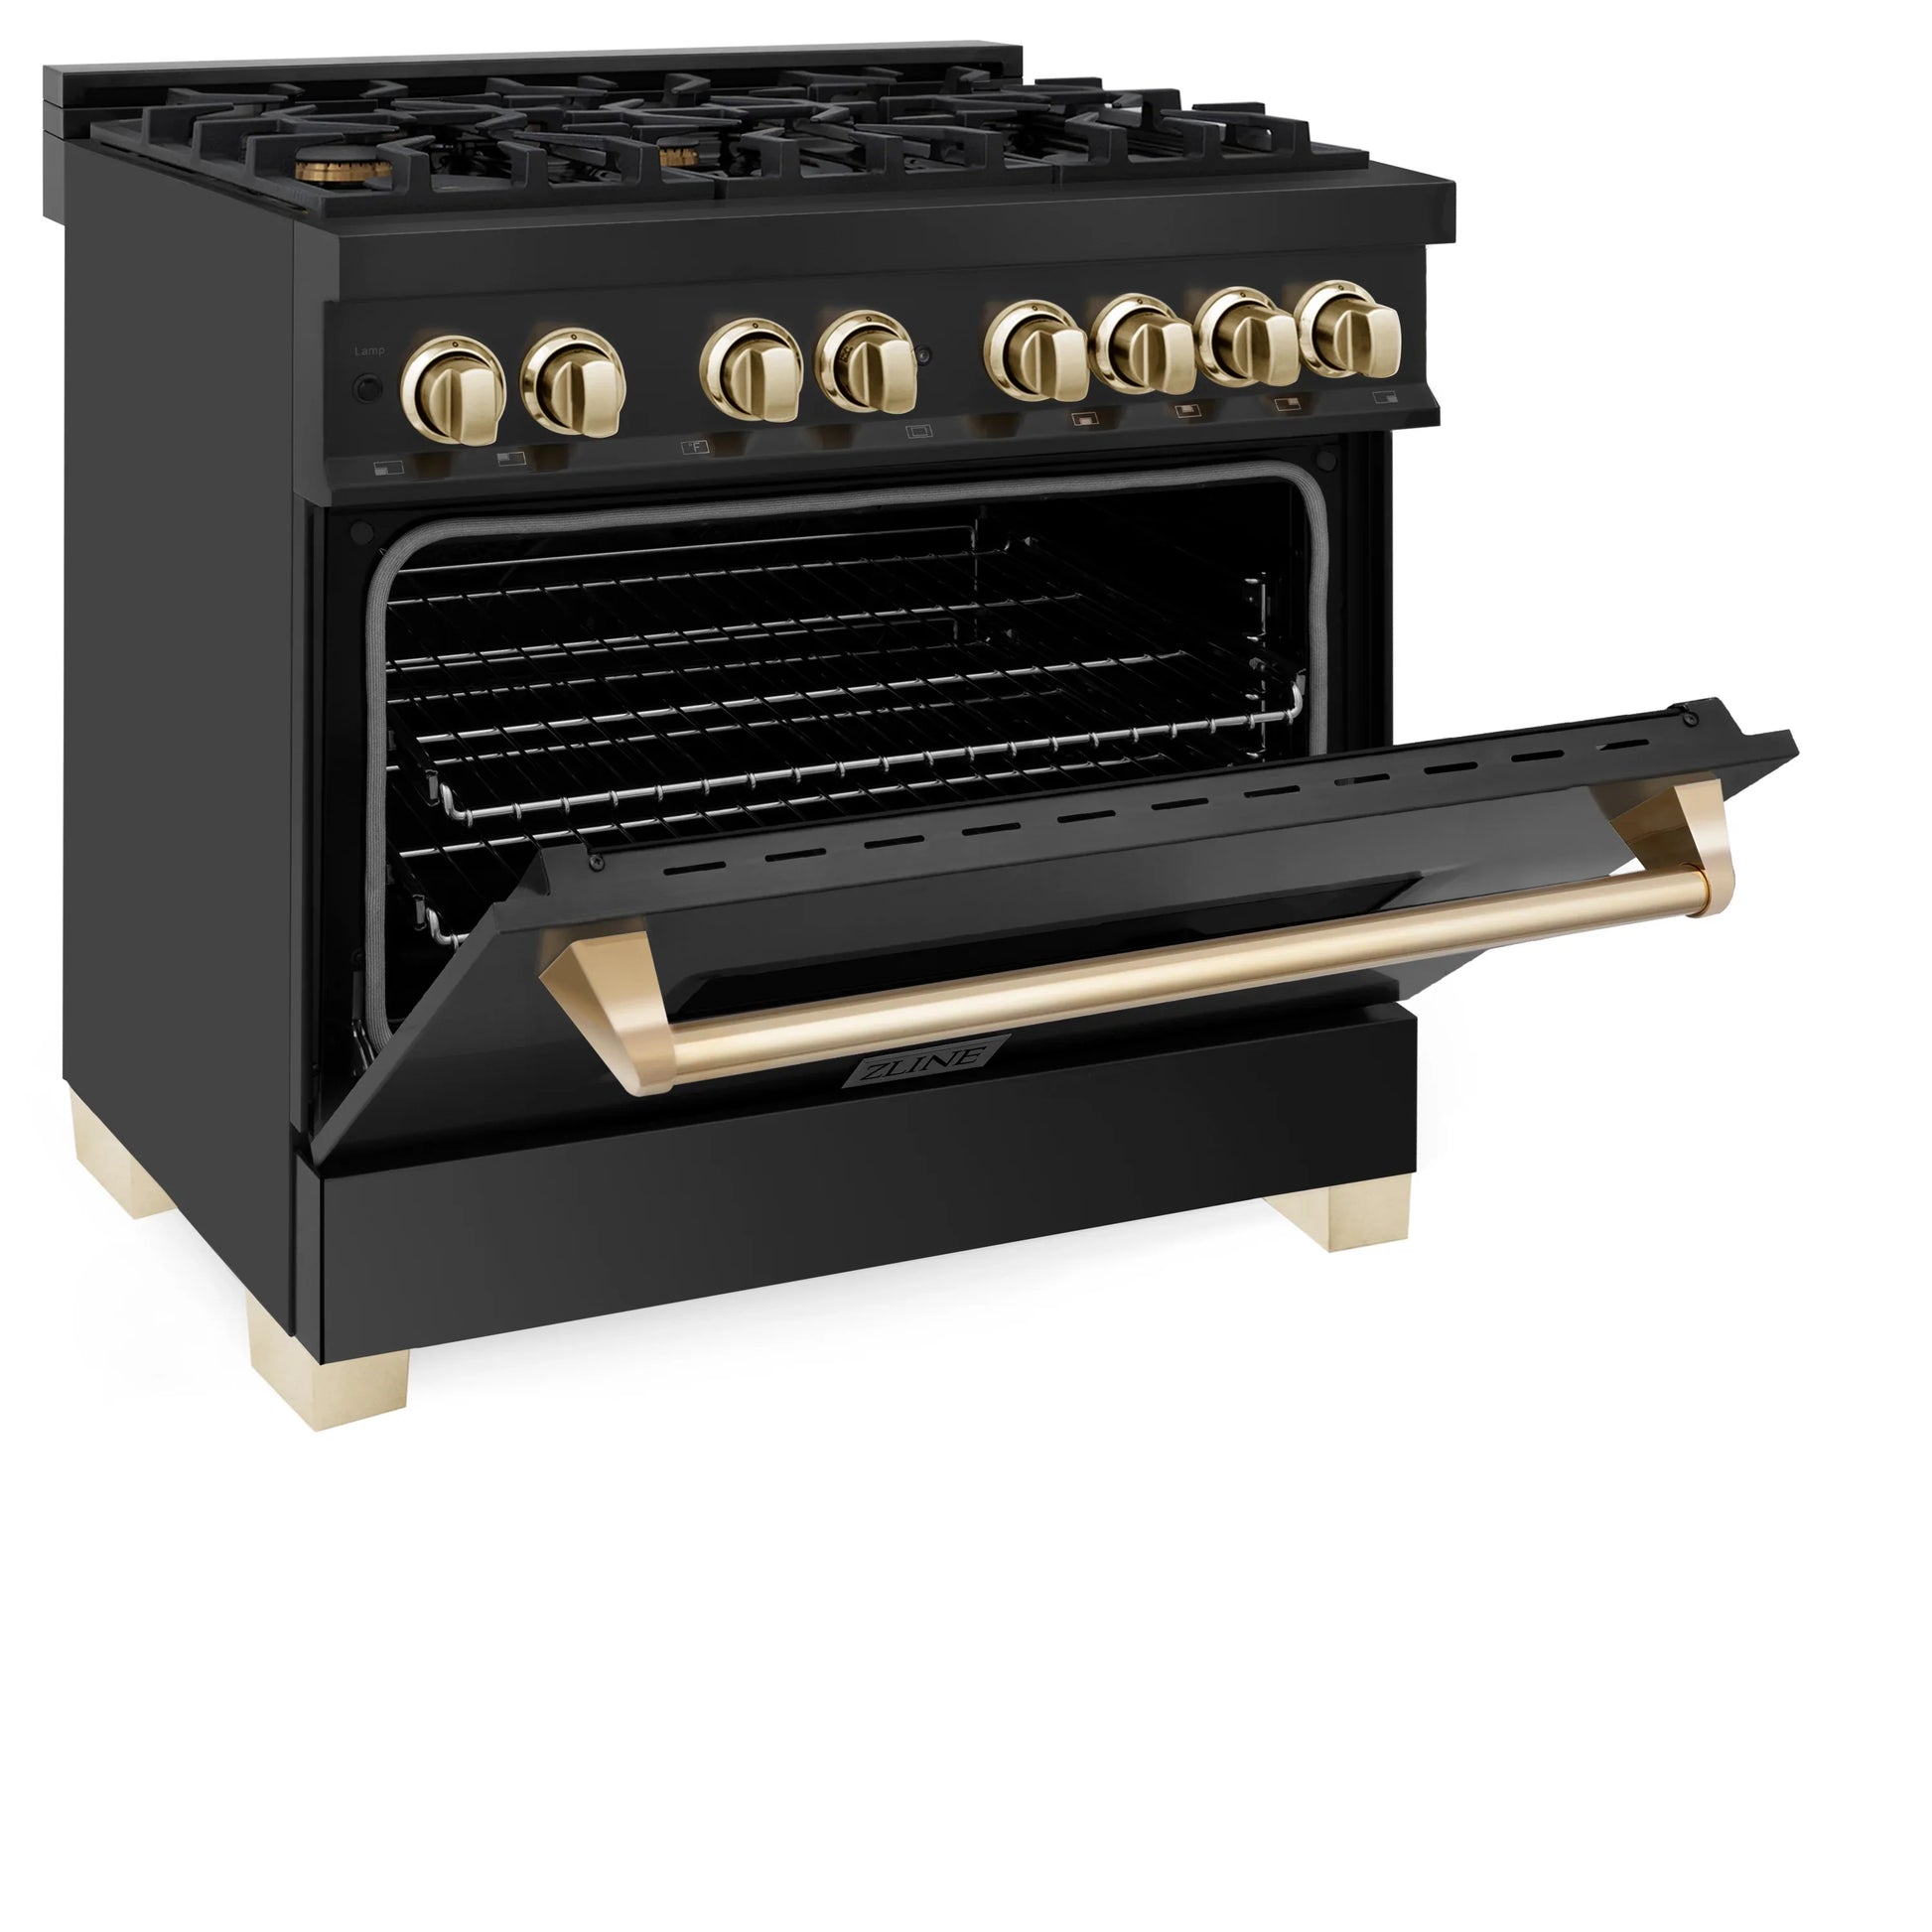 ZLINE Autograph Edition 36" Dual Fuel Range with Gas Stove and Electric Oven - Black Stainless Steel with Gold Accents